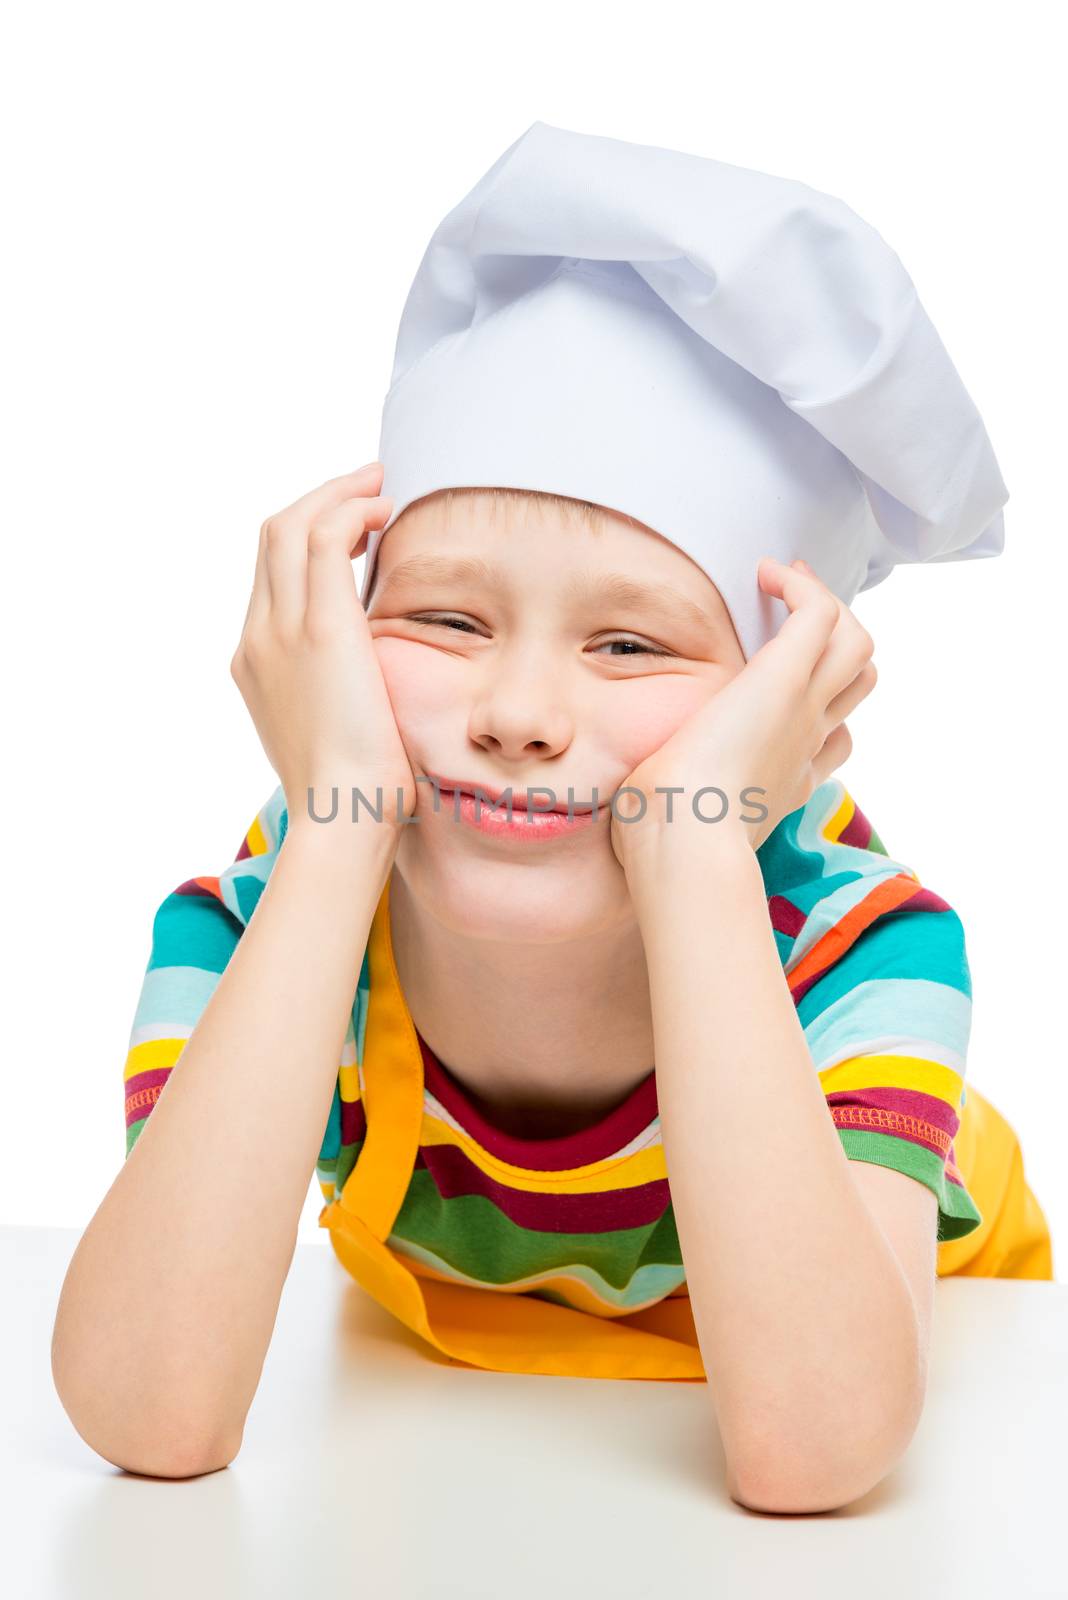 sad cook 10 years old in hat posing on white background by kosmsos111